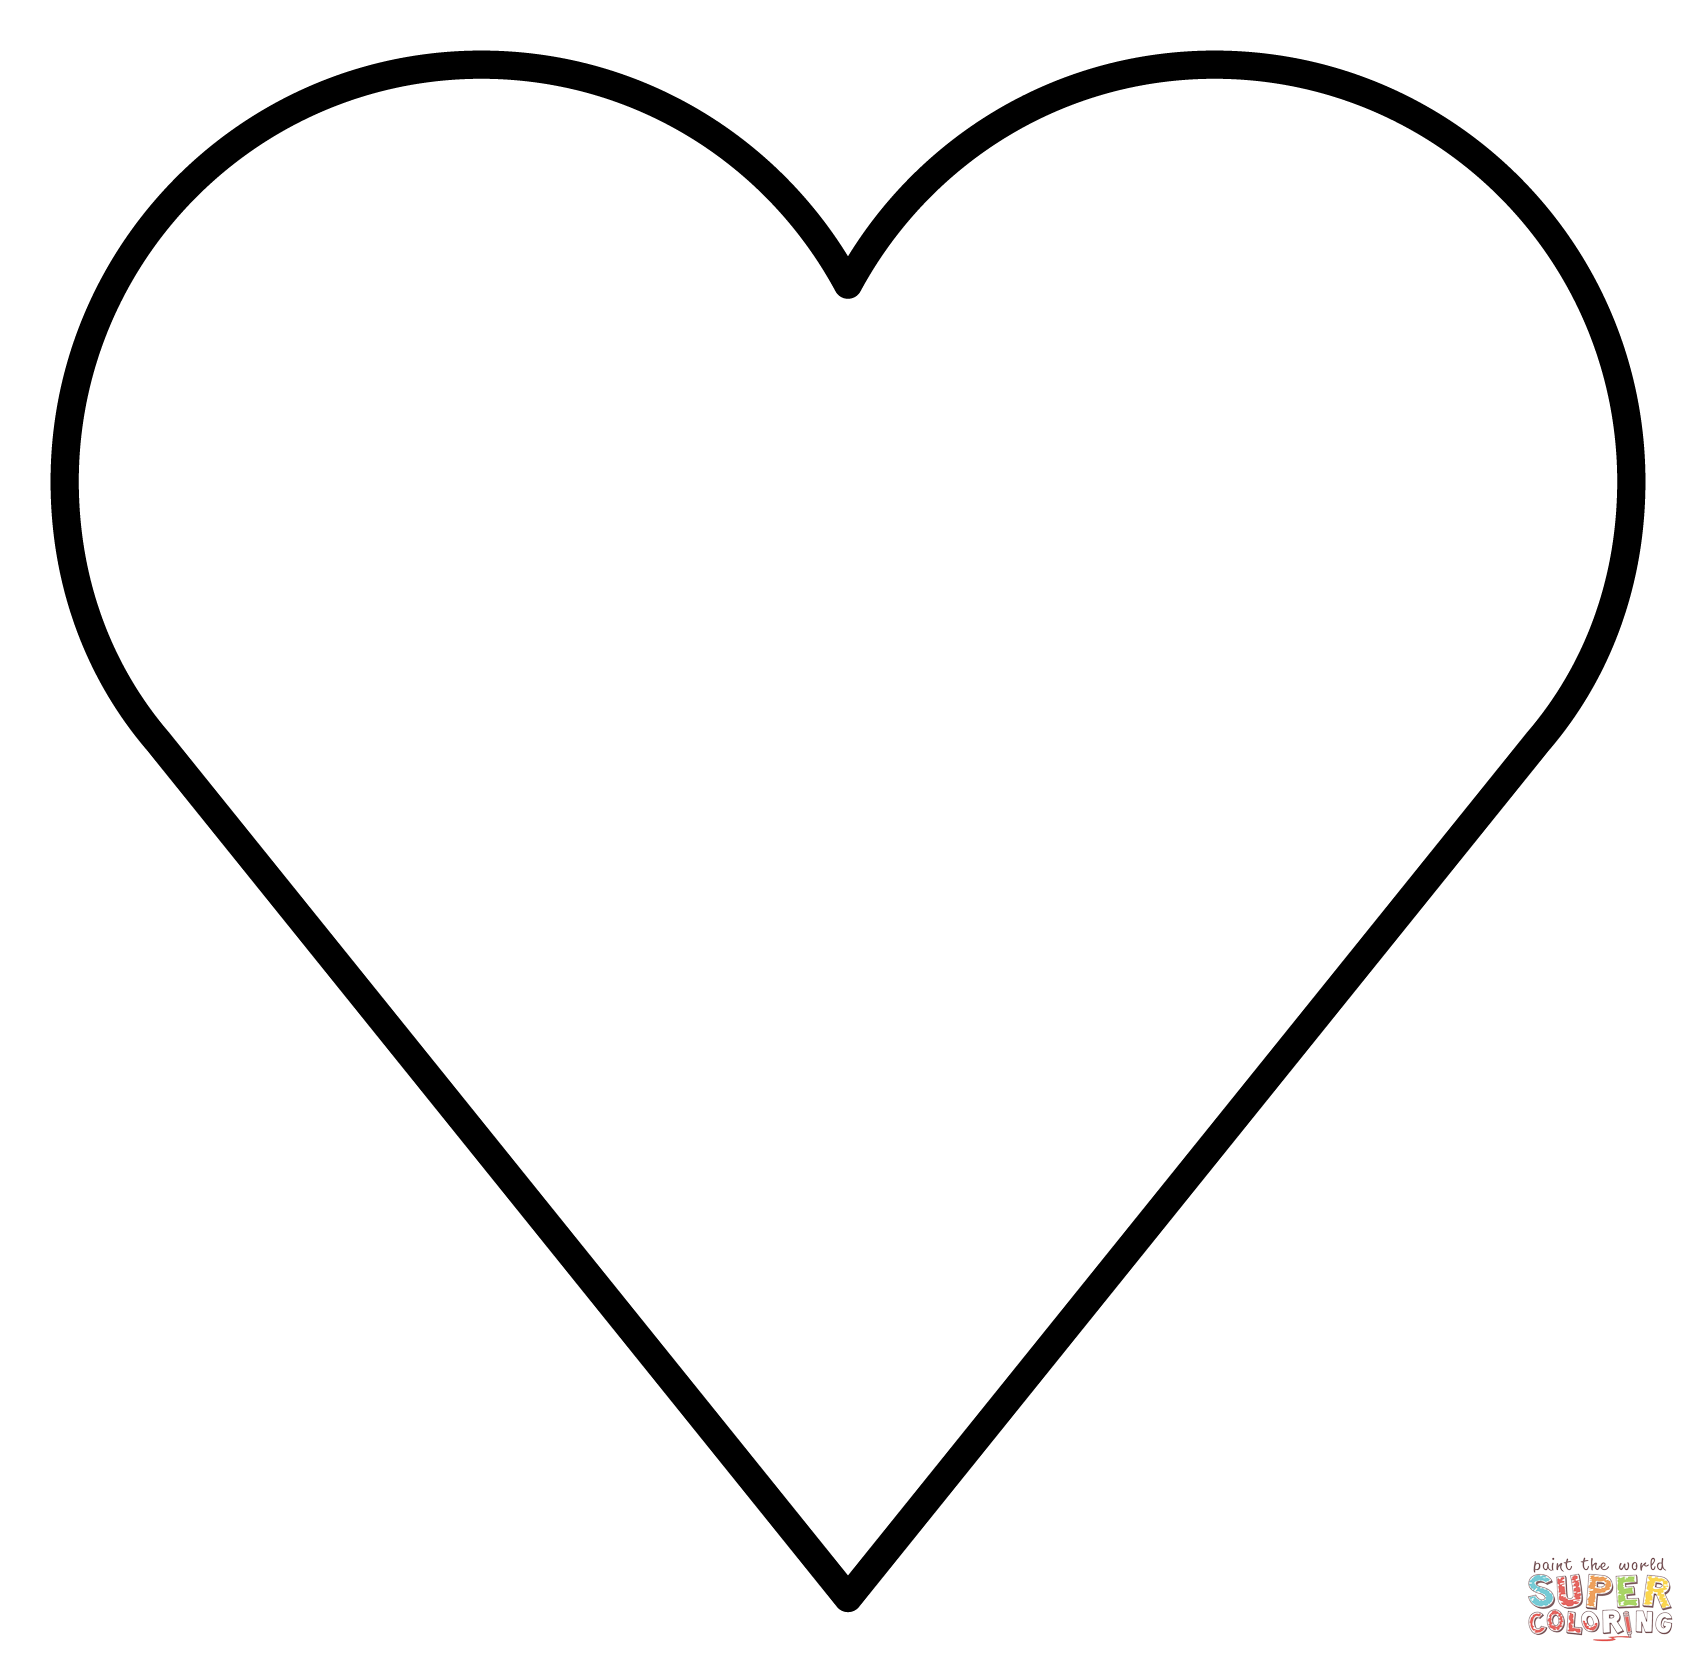 Red heart emoji coloring page free printable coloring pages